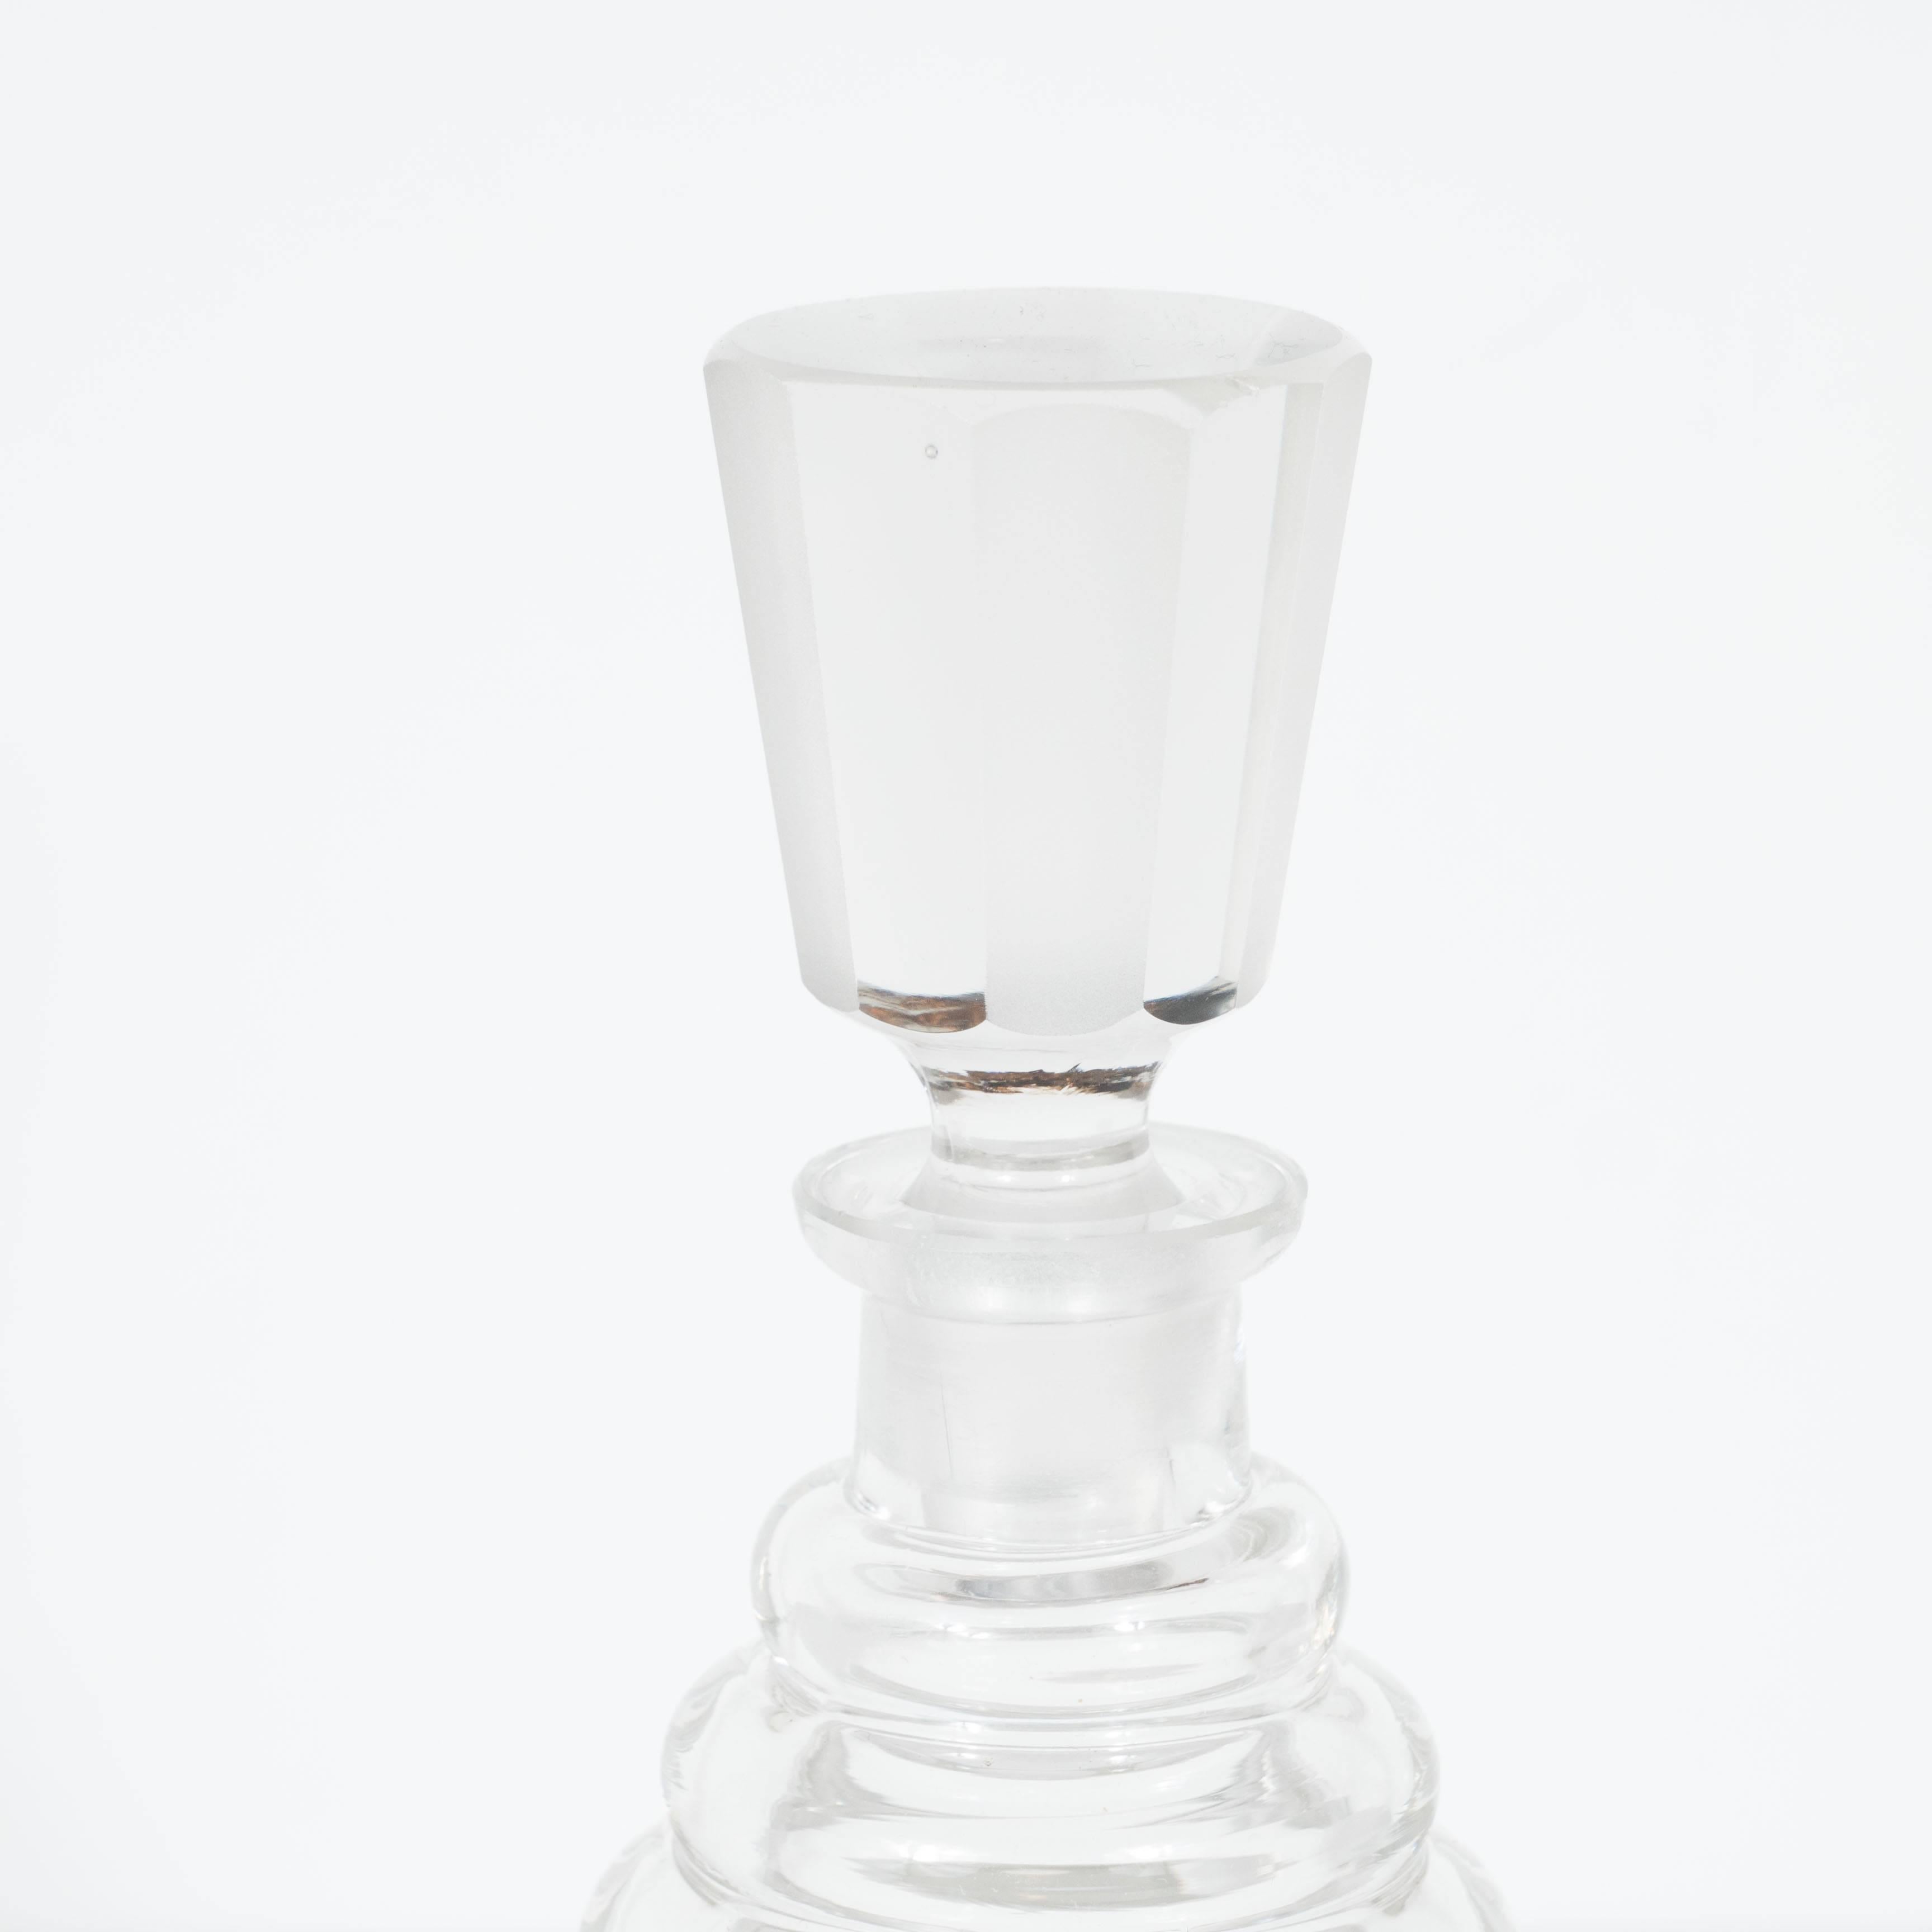 Mid-20th Century Art Deco Czechoslovakian Glass Decanter with Frosted Accents in Cubist Form